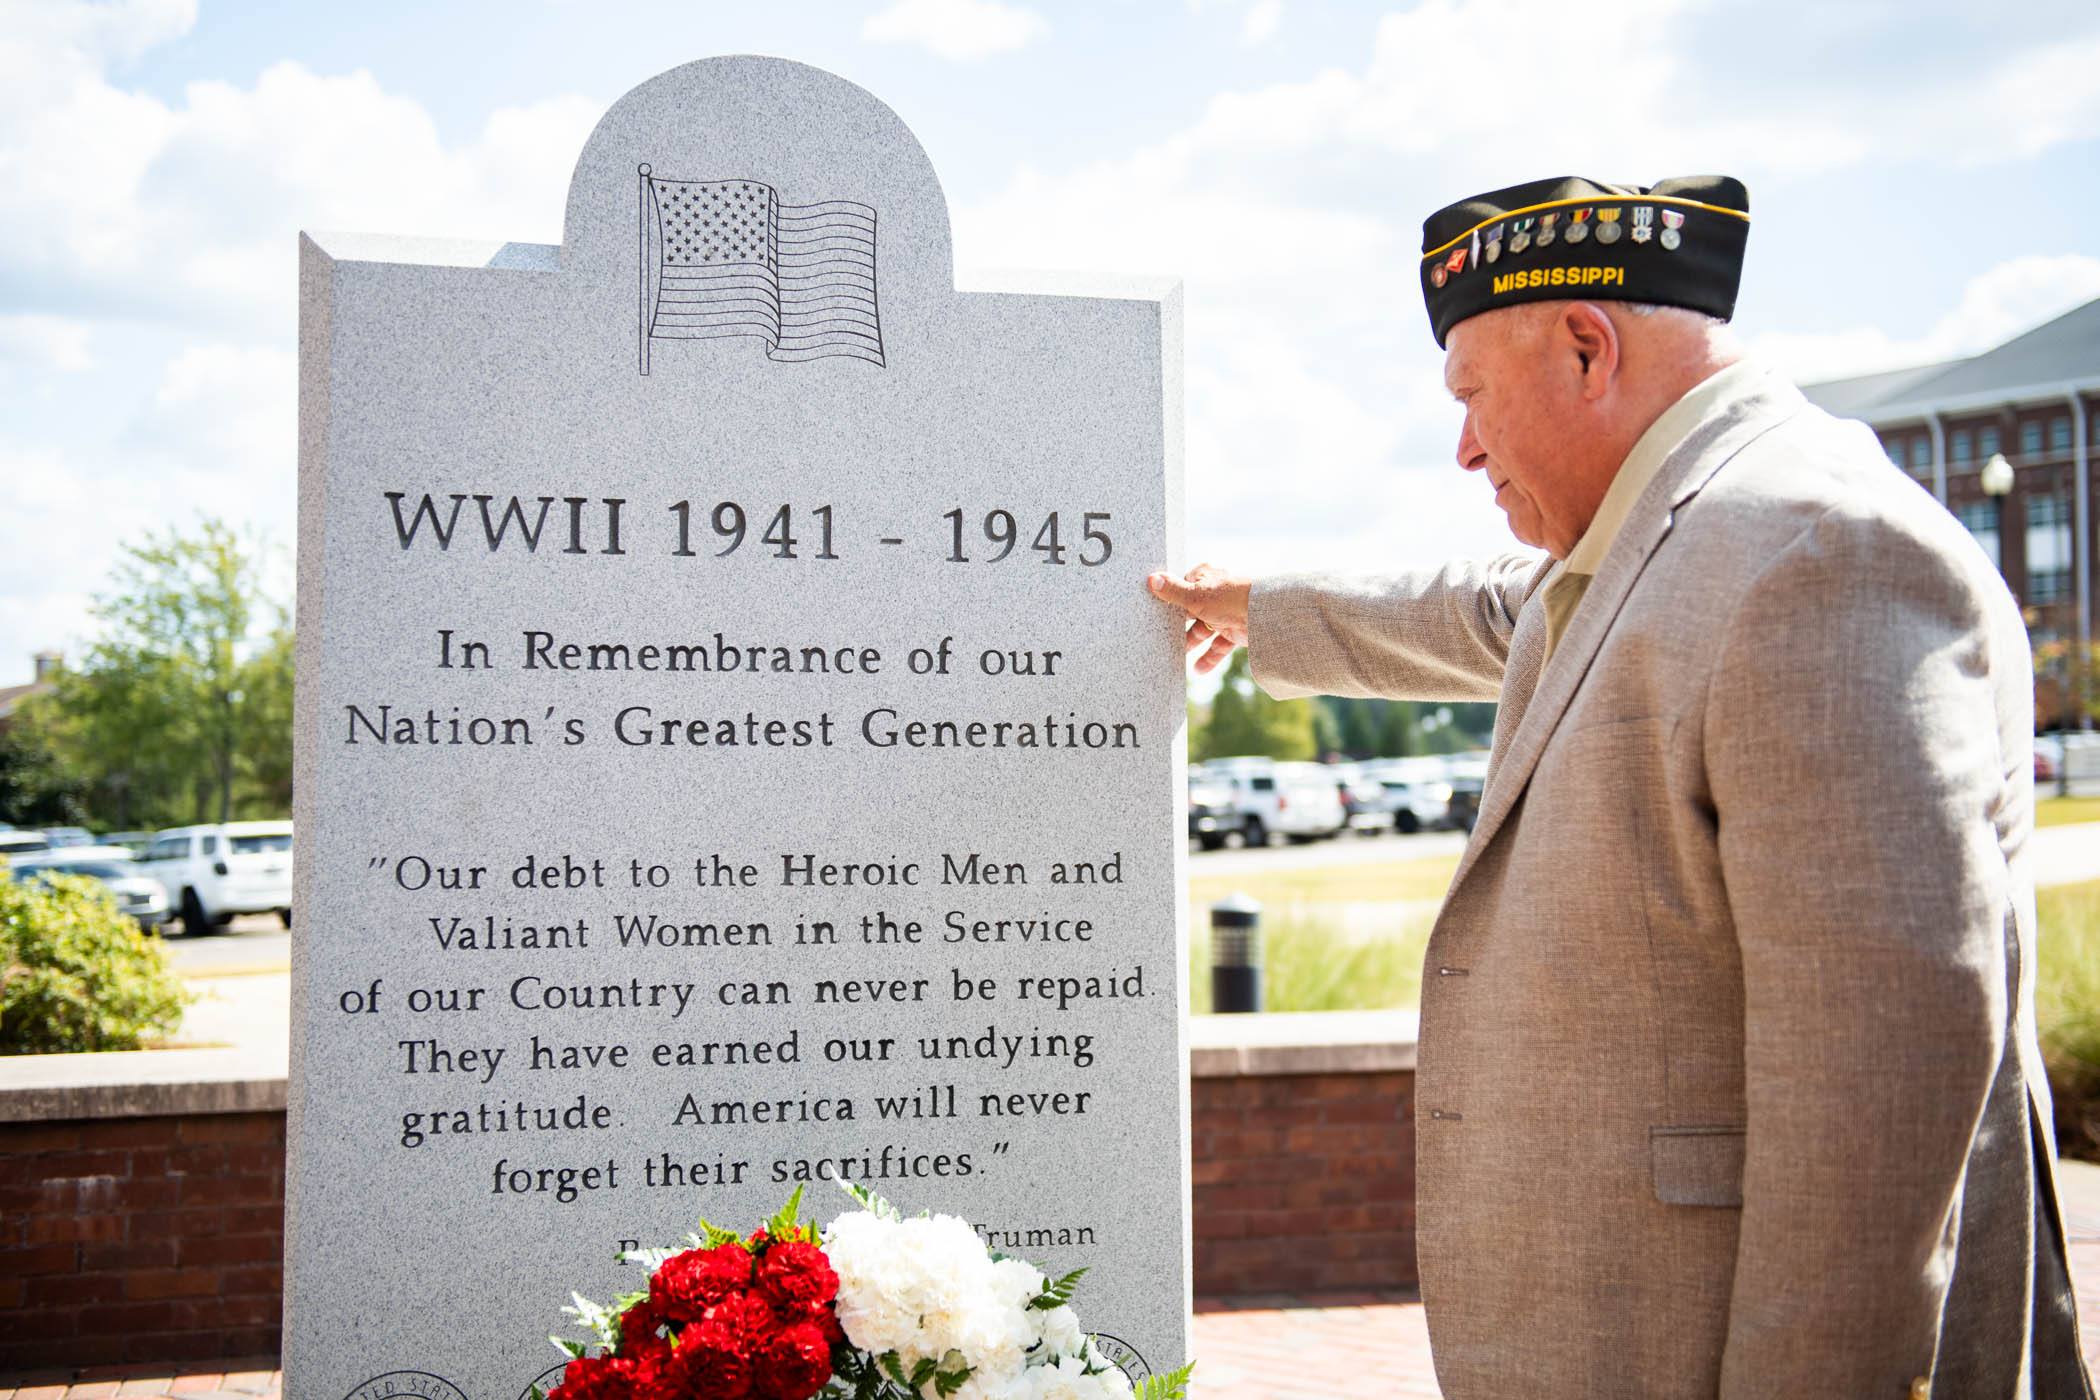  MSU&#039;s Center for America&#039;s Veterans unveils an honorary monument recognizing the service of those who laid down their lives for their country in combat during WWII.